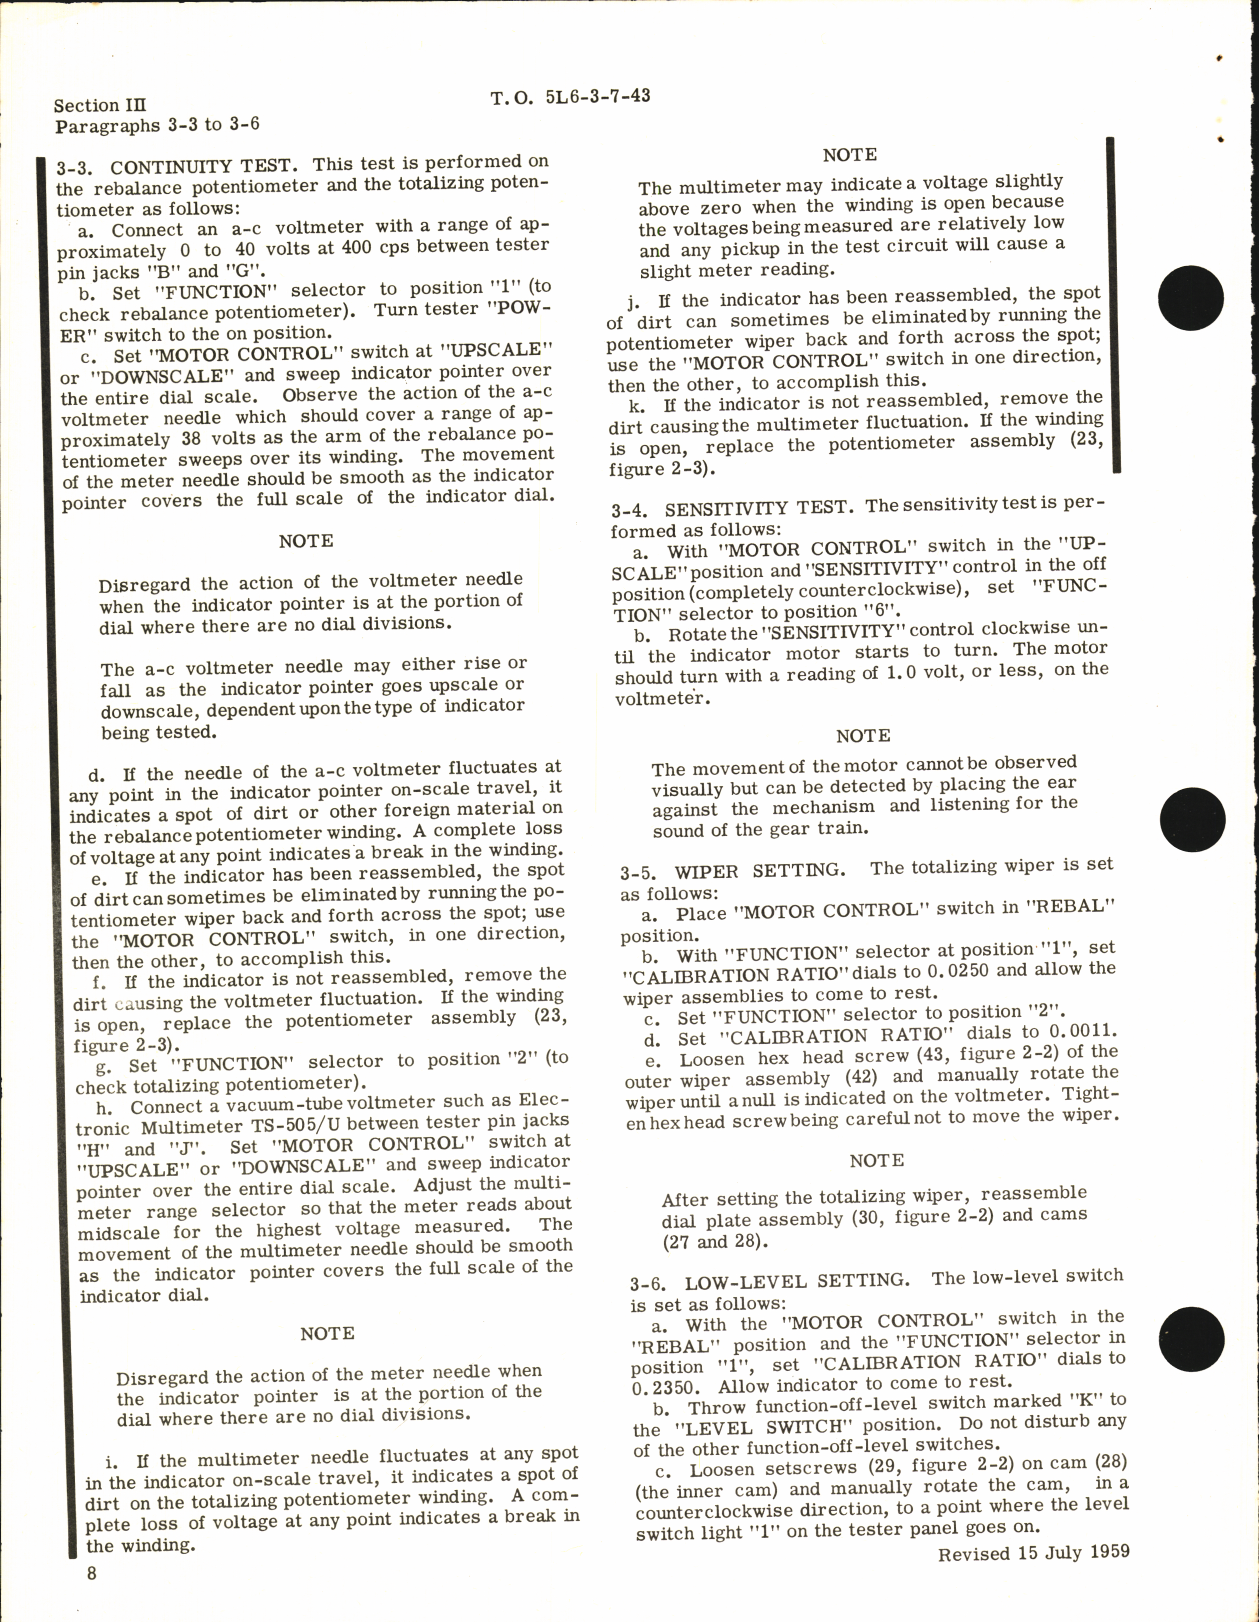 Sample page 8 from AirCorps Library document: Overhaul Instructions for Capacitor-Type Fuel Quantity Gage Indicators (Sensitive Type)